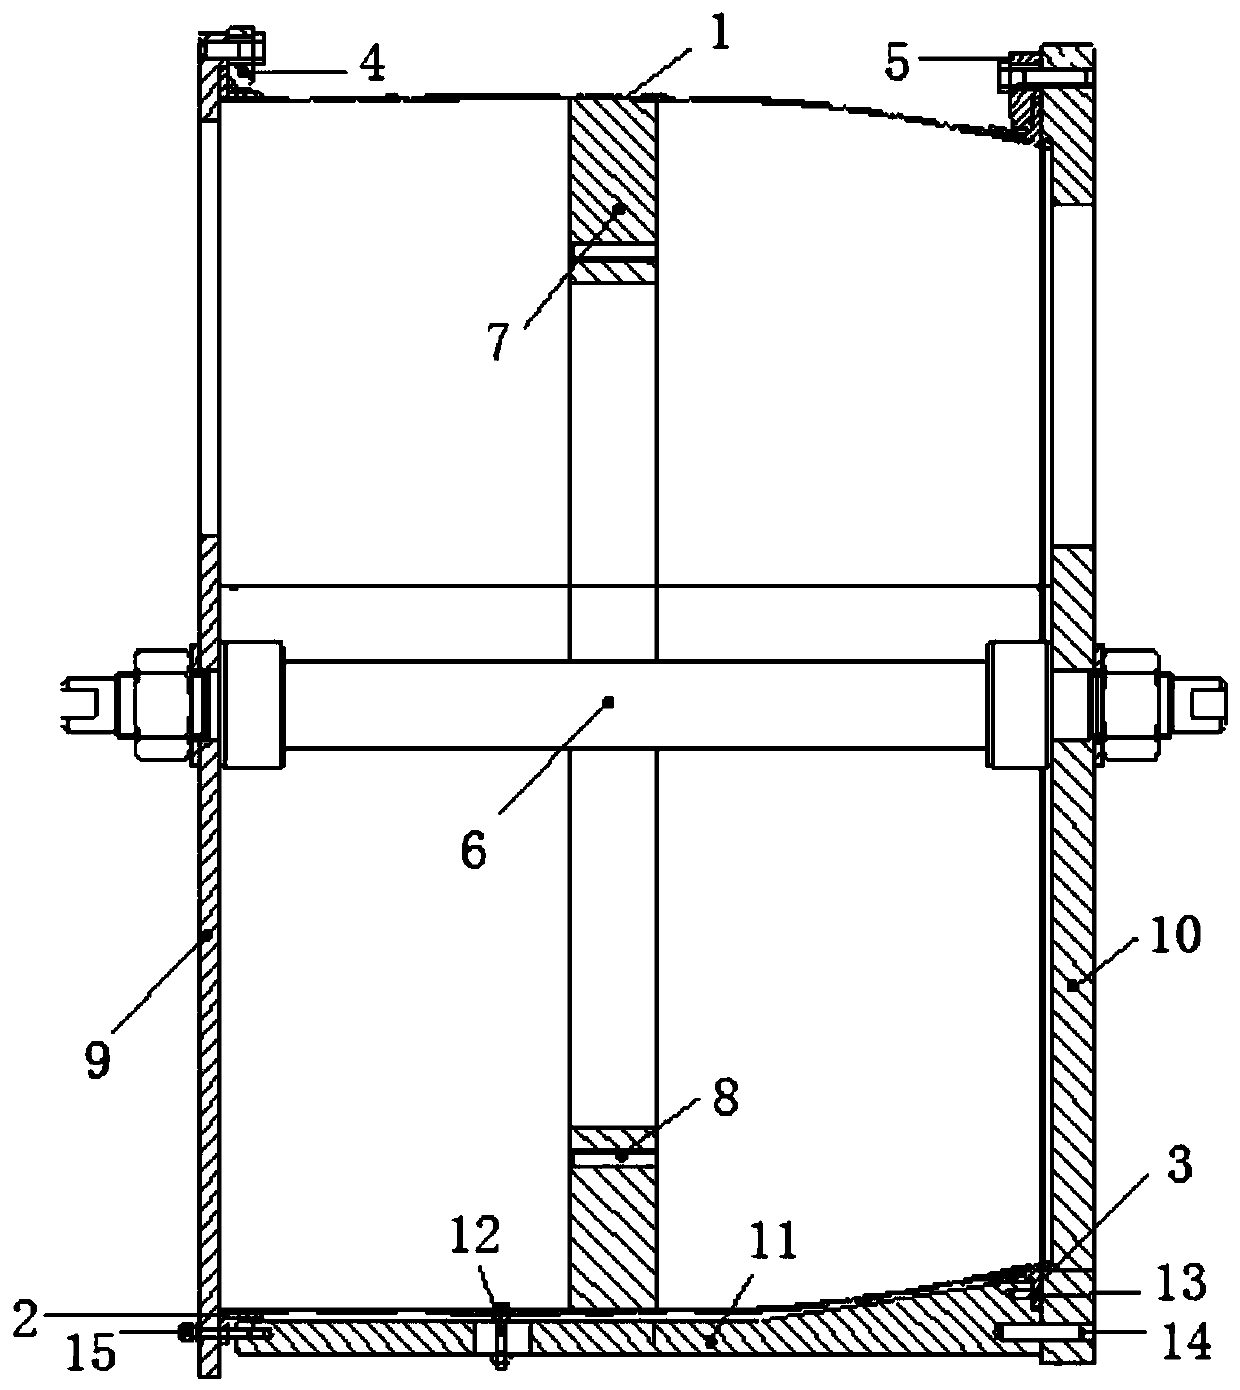 A clamping device for riveting assembly of large thin-walled components